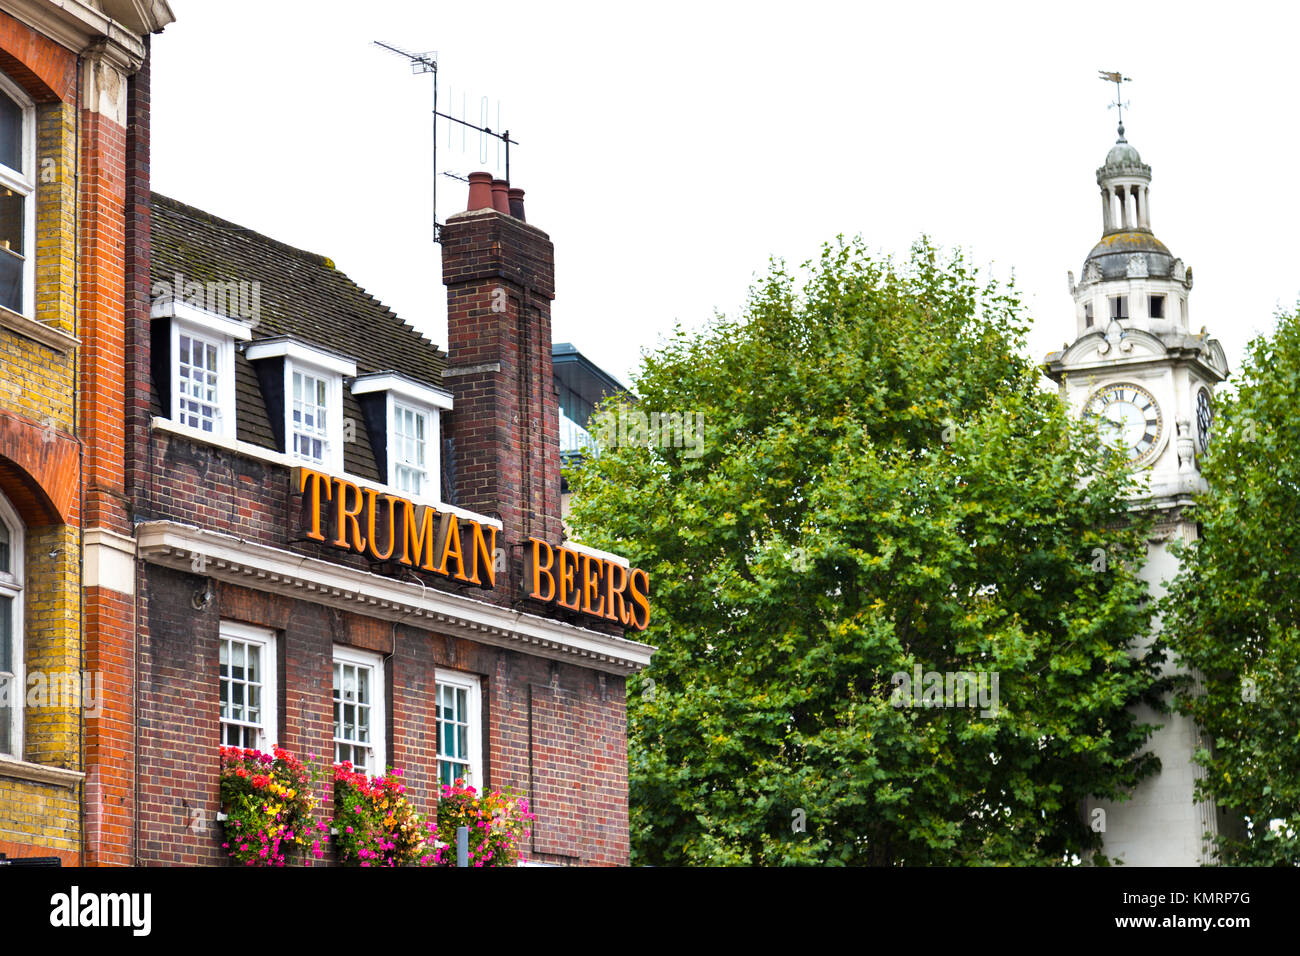 Exterior of The Bancroft Arms pub with 'Truman Beers' written on the facade, London, UK Stock Photo